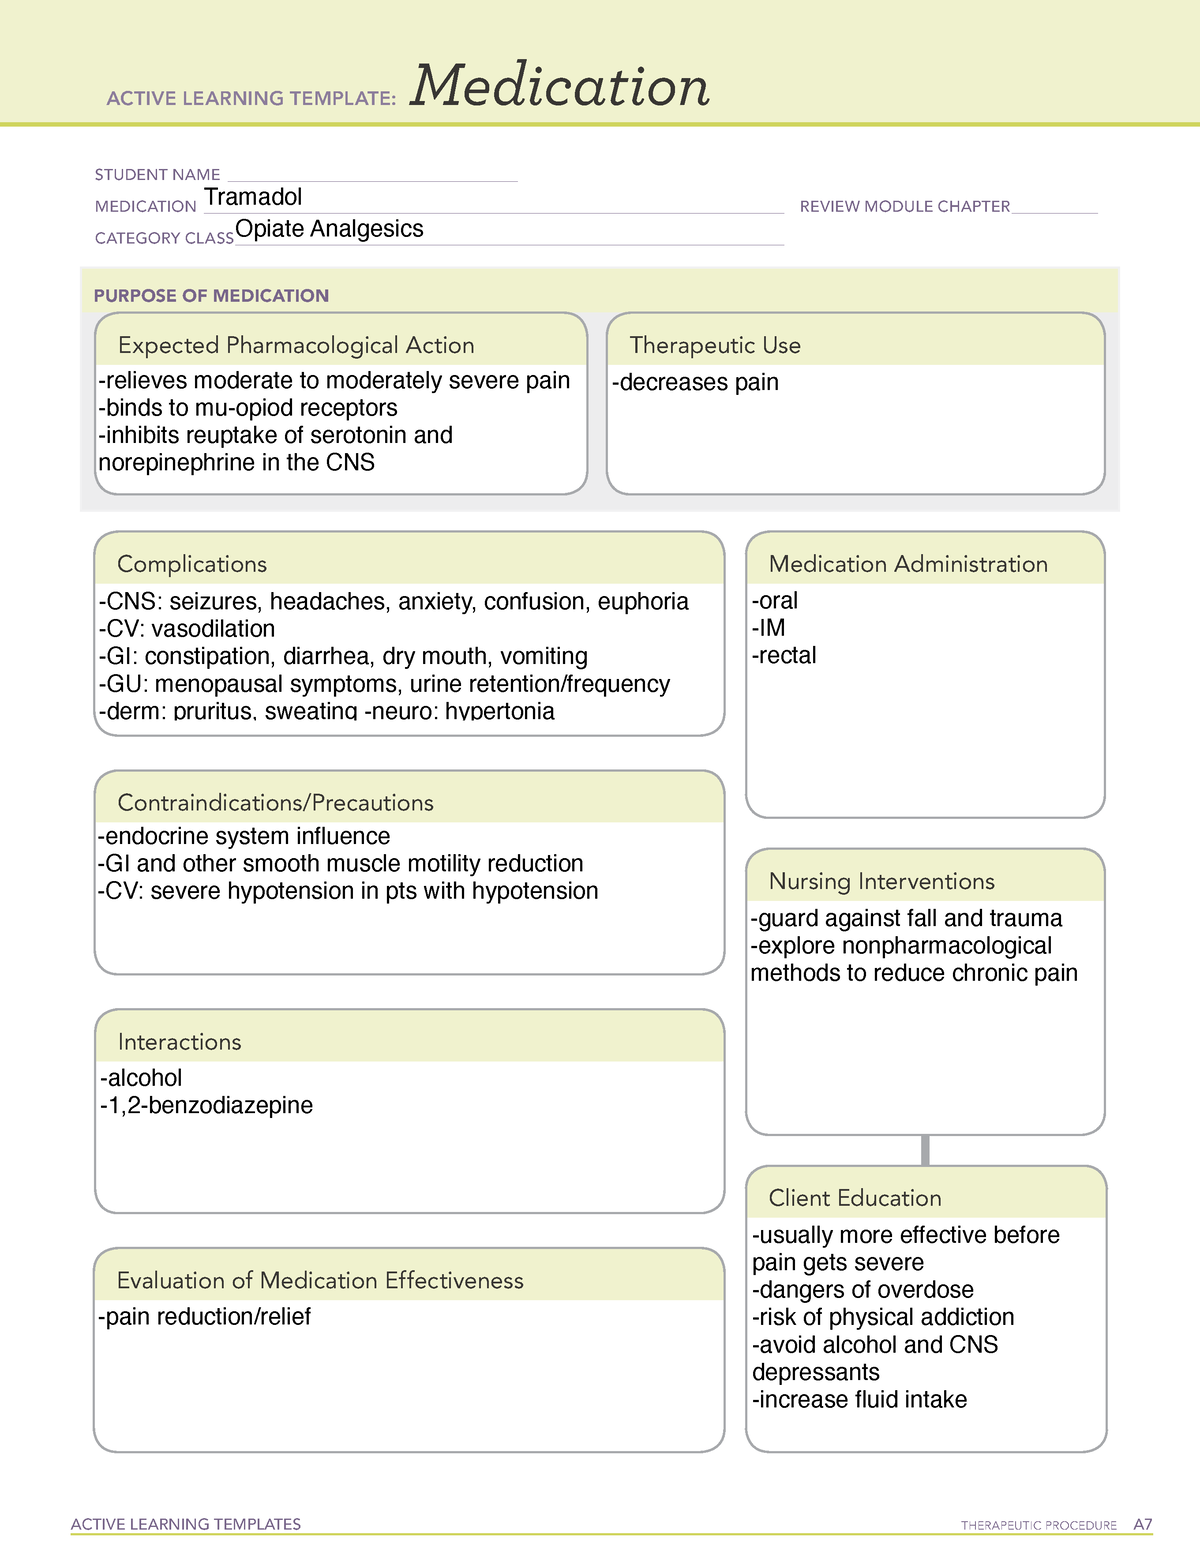 5-tramadol-drug-template-active-learning-templates-therapeutic